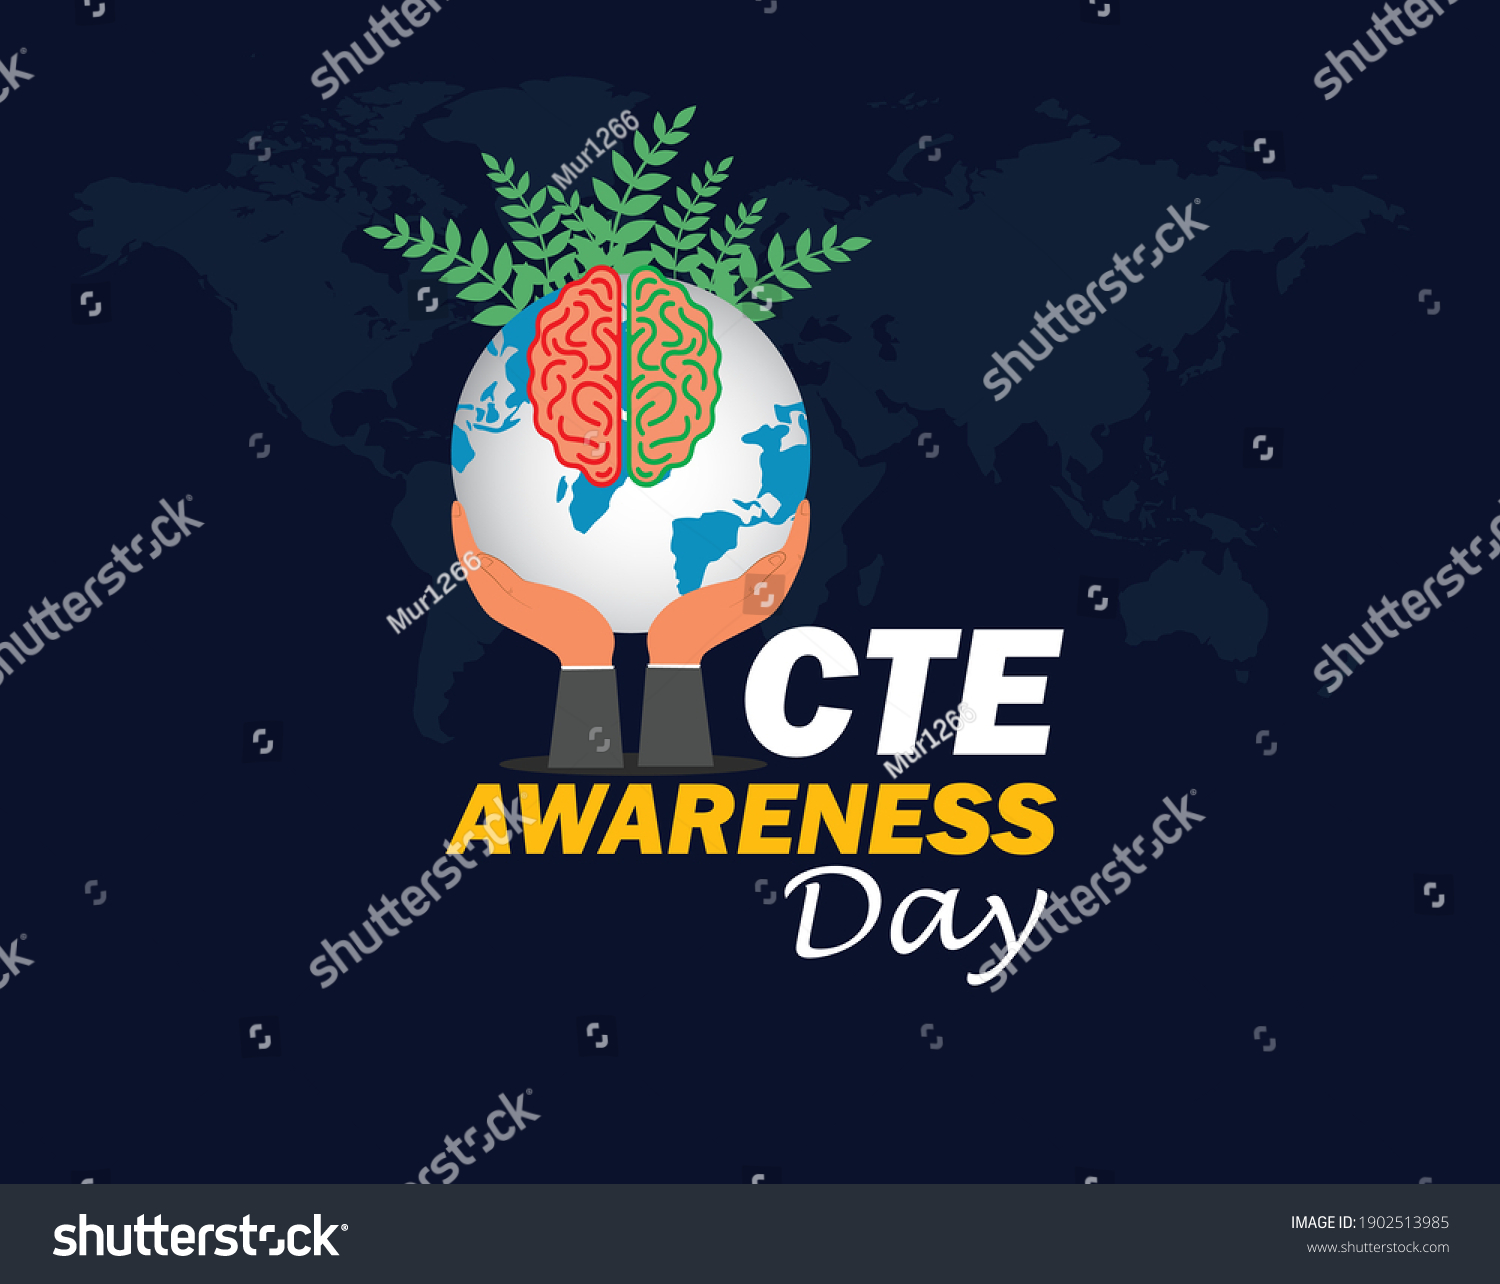 SVG of Chronic traumatic encephalopathy (CTE) awareness day. January 30. concept for banner or poster design. Vector illustration. svg